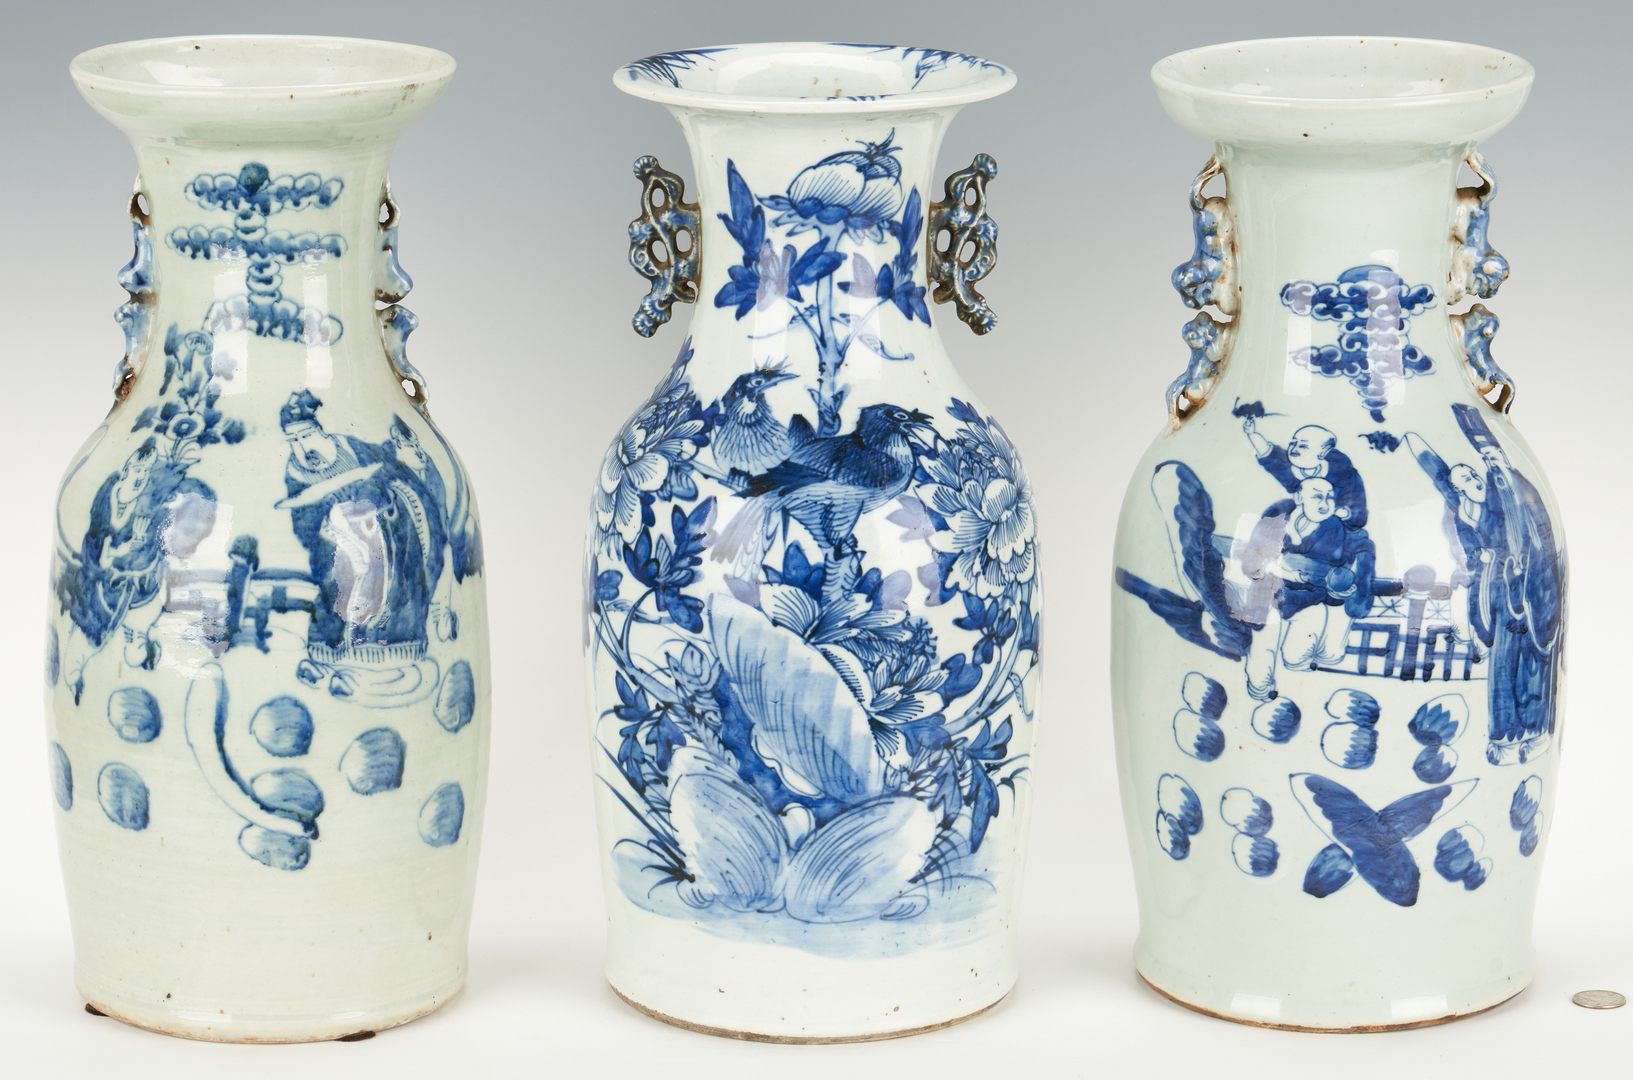 Lot 20: 3 Blue and White Porcelain Vases and Chinese Warrior Plate, 4 items